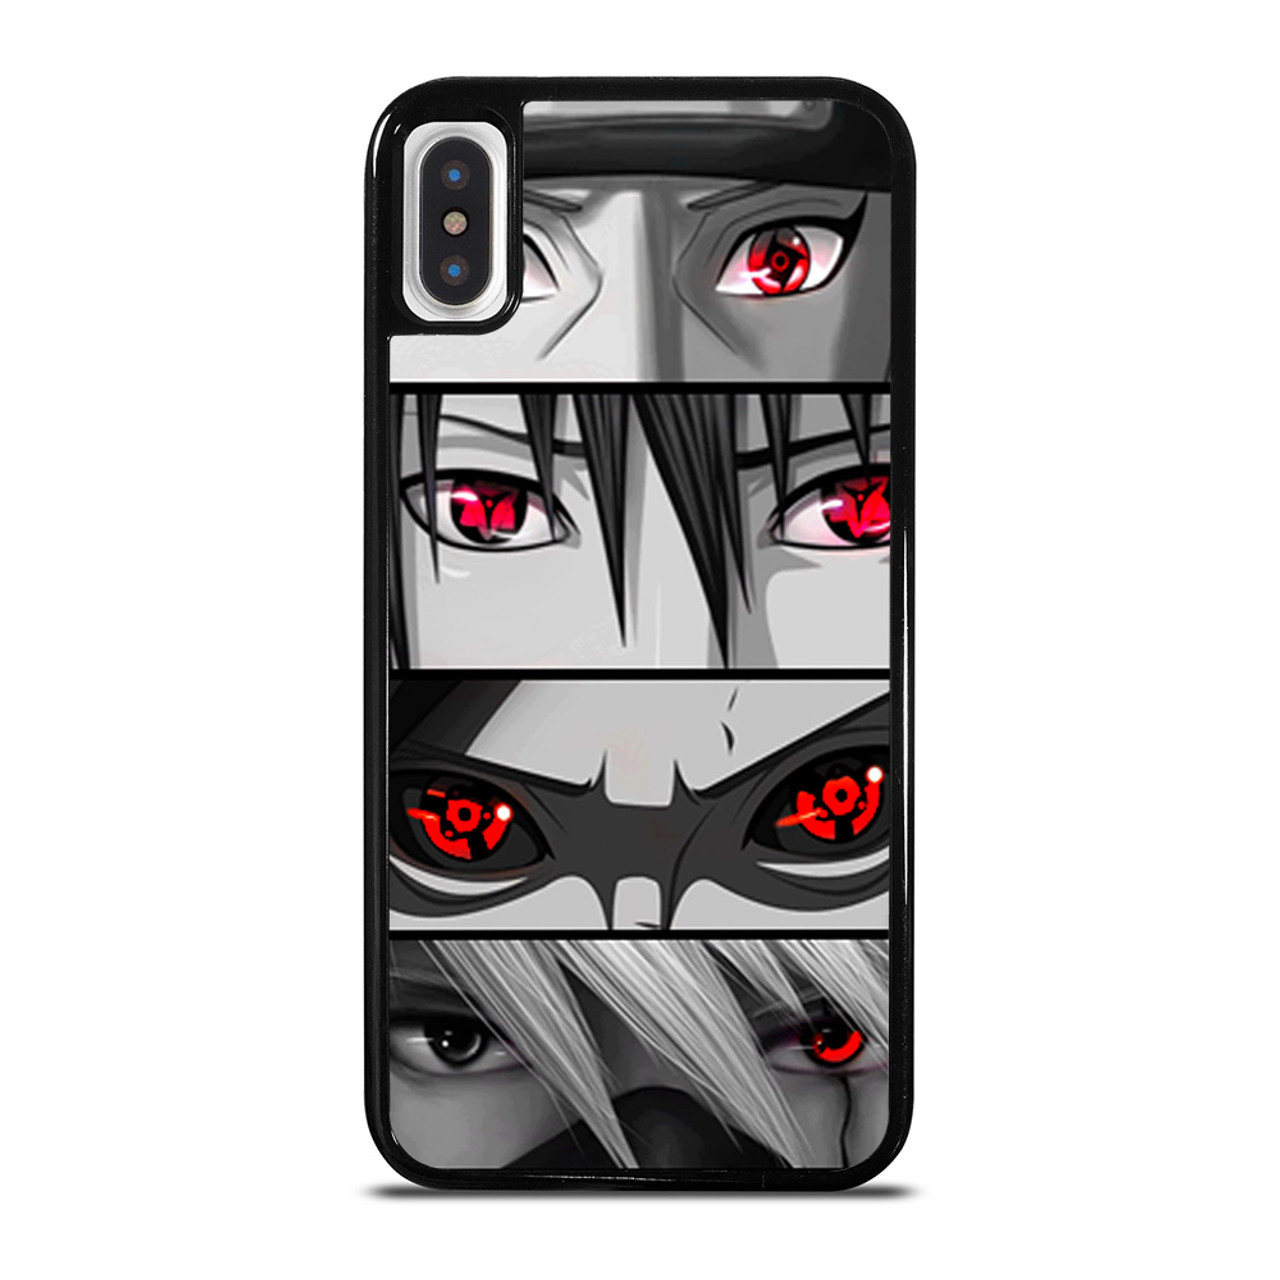 Phone Case Cover Shell for IPhone 12 Pro Max 11 8 7 6 Plus SE2 XR X XS MAX  Japan Anime Given Back Funda Coque for Iphone 12 Mini - Price history